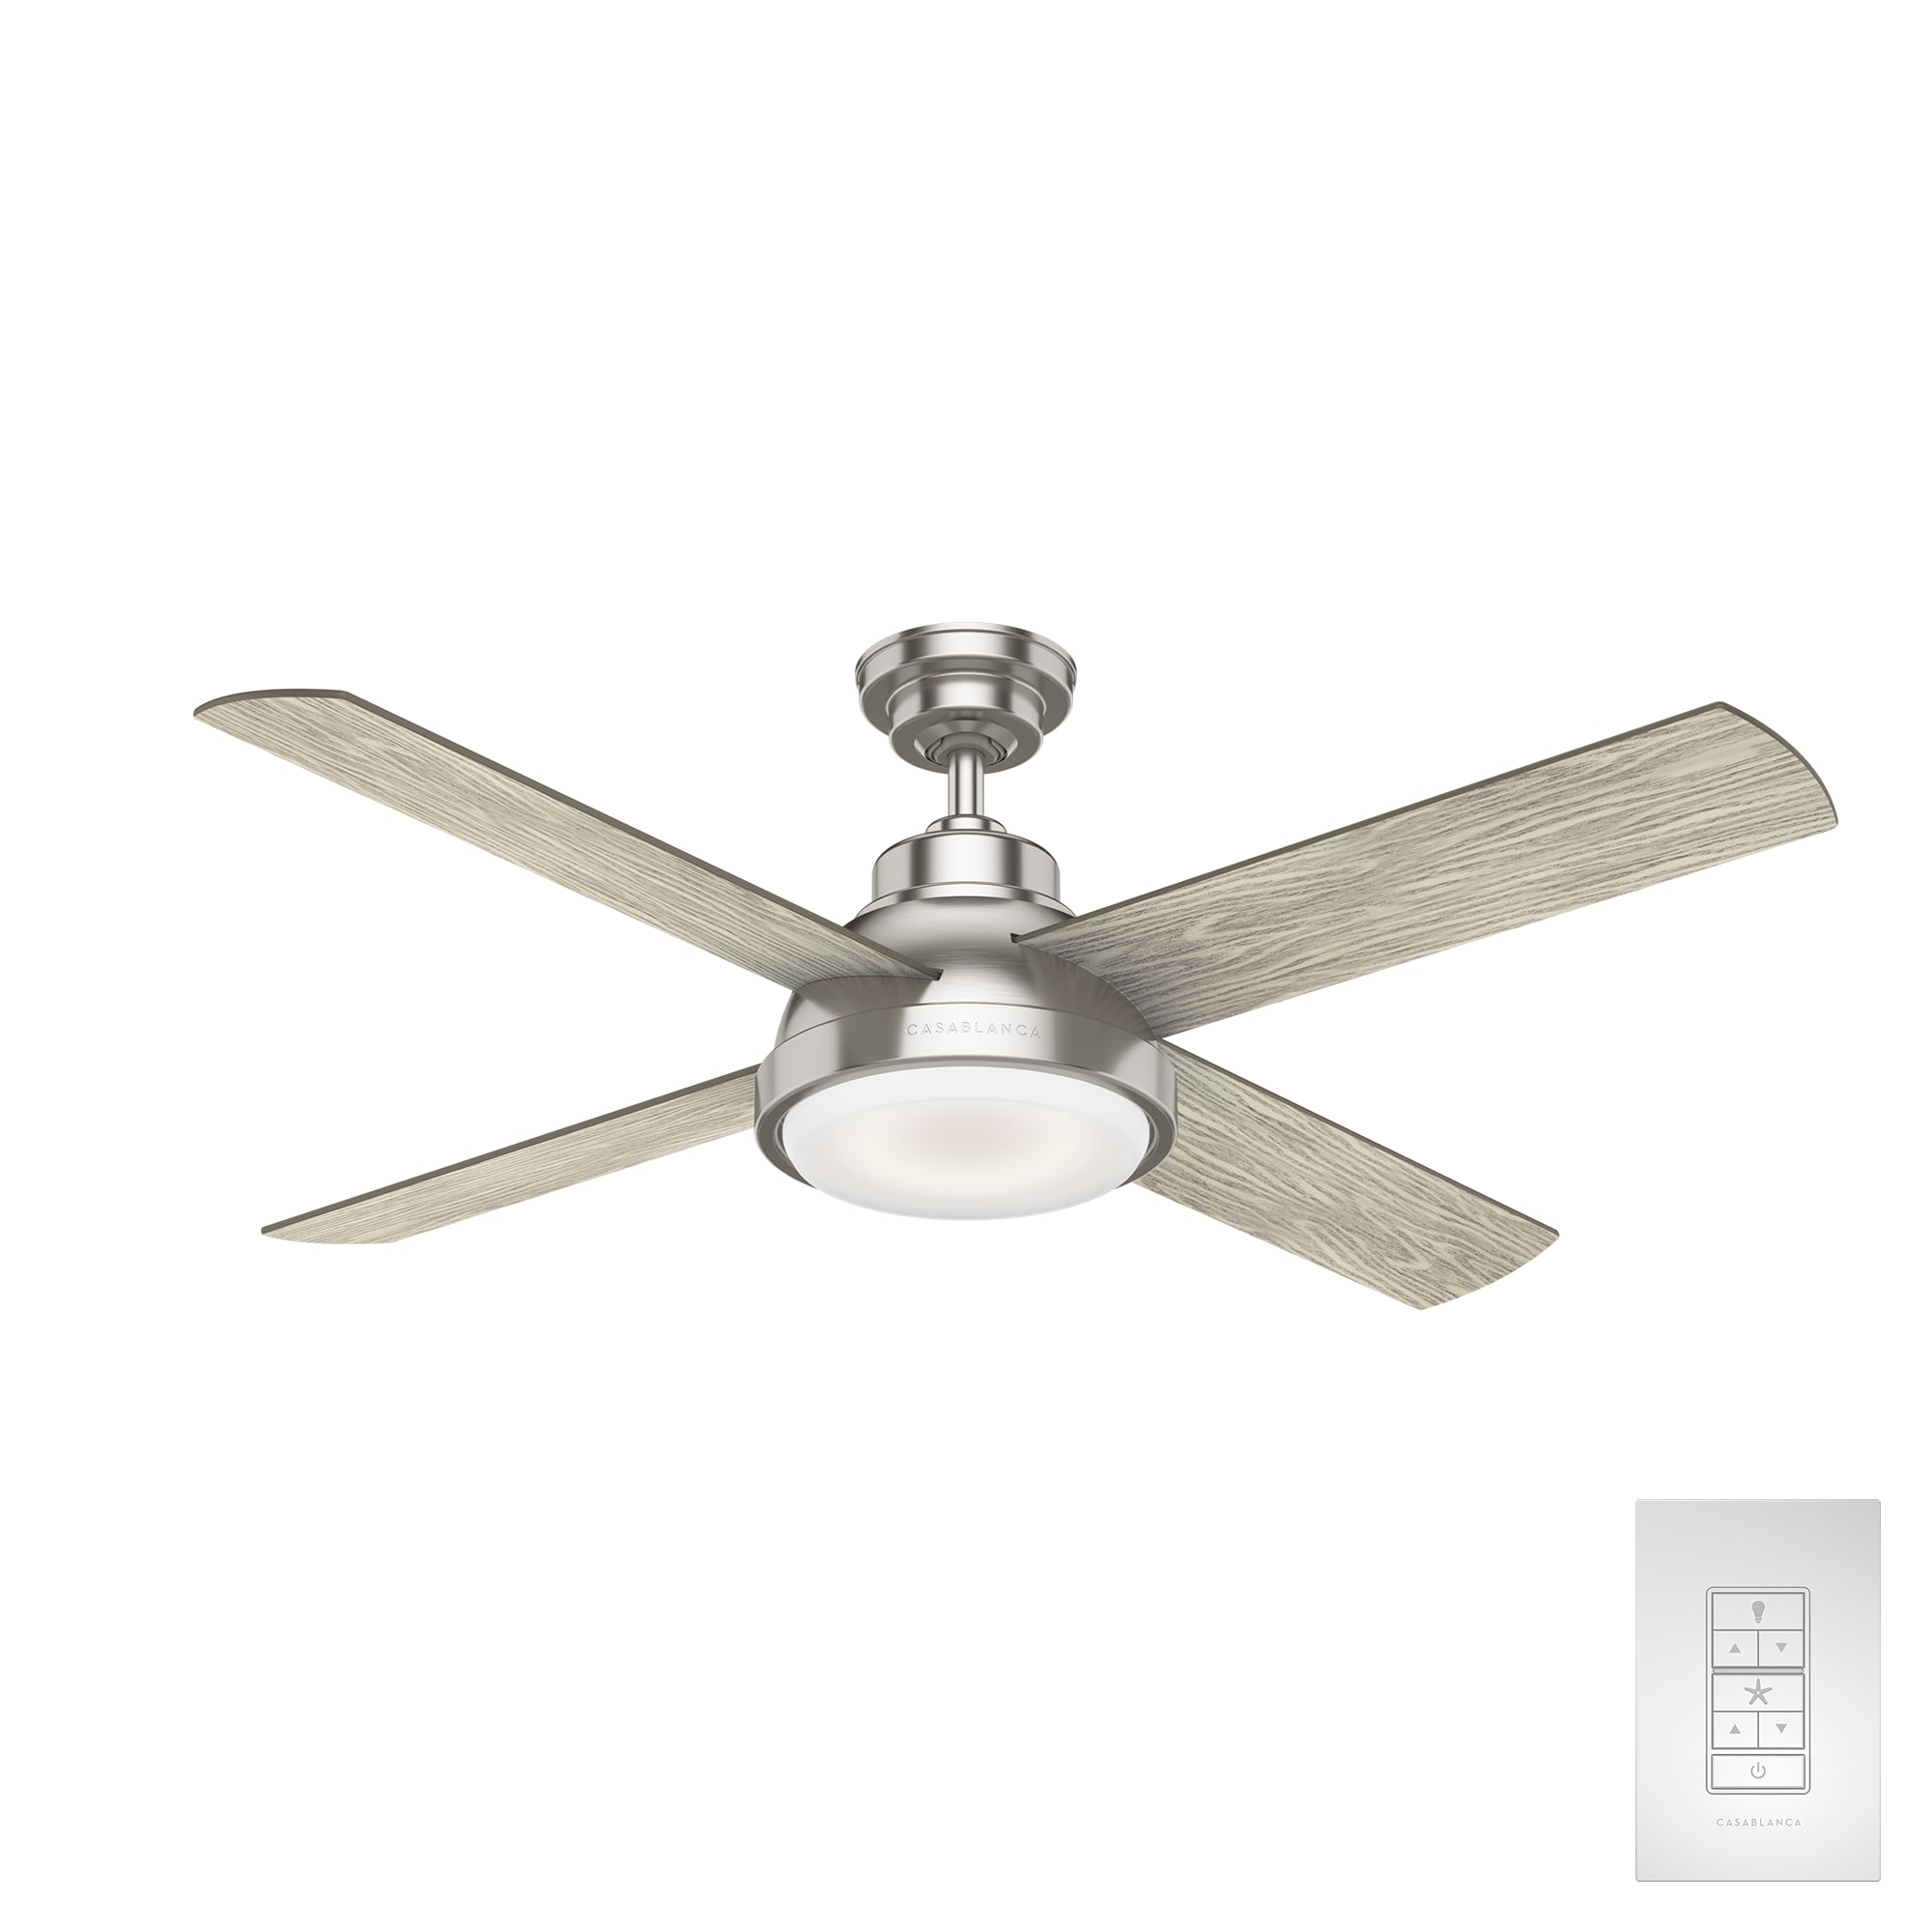 Casablanca Levitt 54 In Brushed Nickel Integrated Led Indoor Downrod Or Flush Mount Ceiling Fan With Light And Wall Mounted Remote 4 Blade The Fans Department At Lowes Com